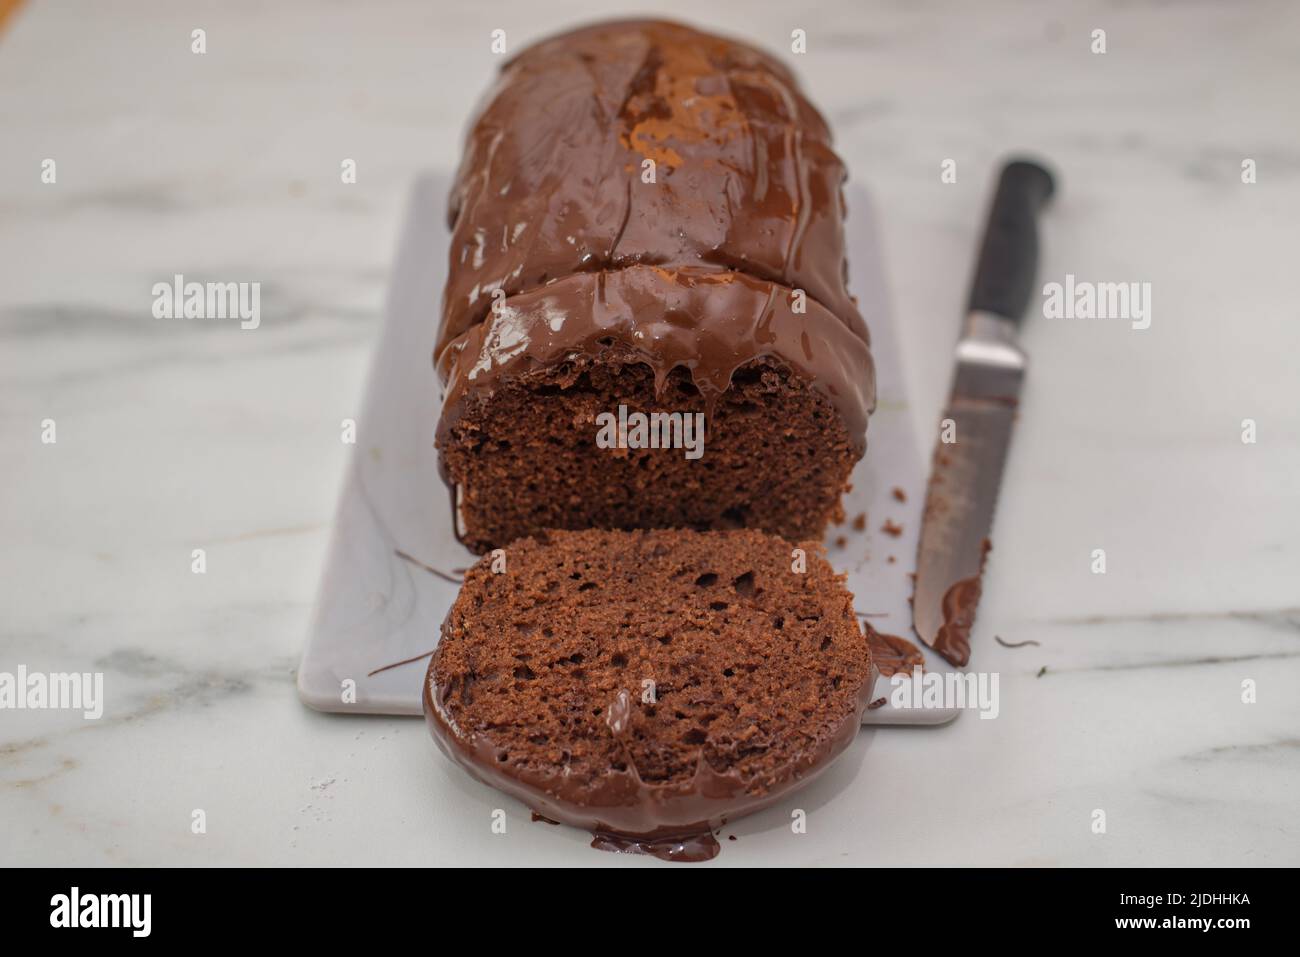 sweet home made chocolate pound cake on a table Stock Photo